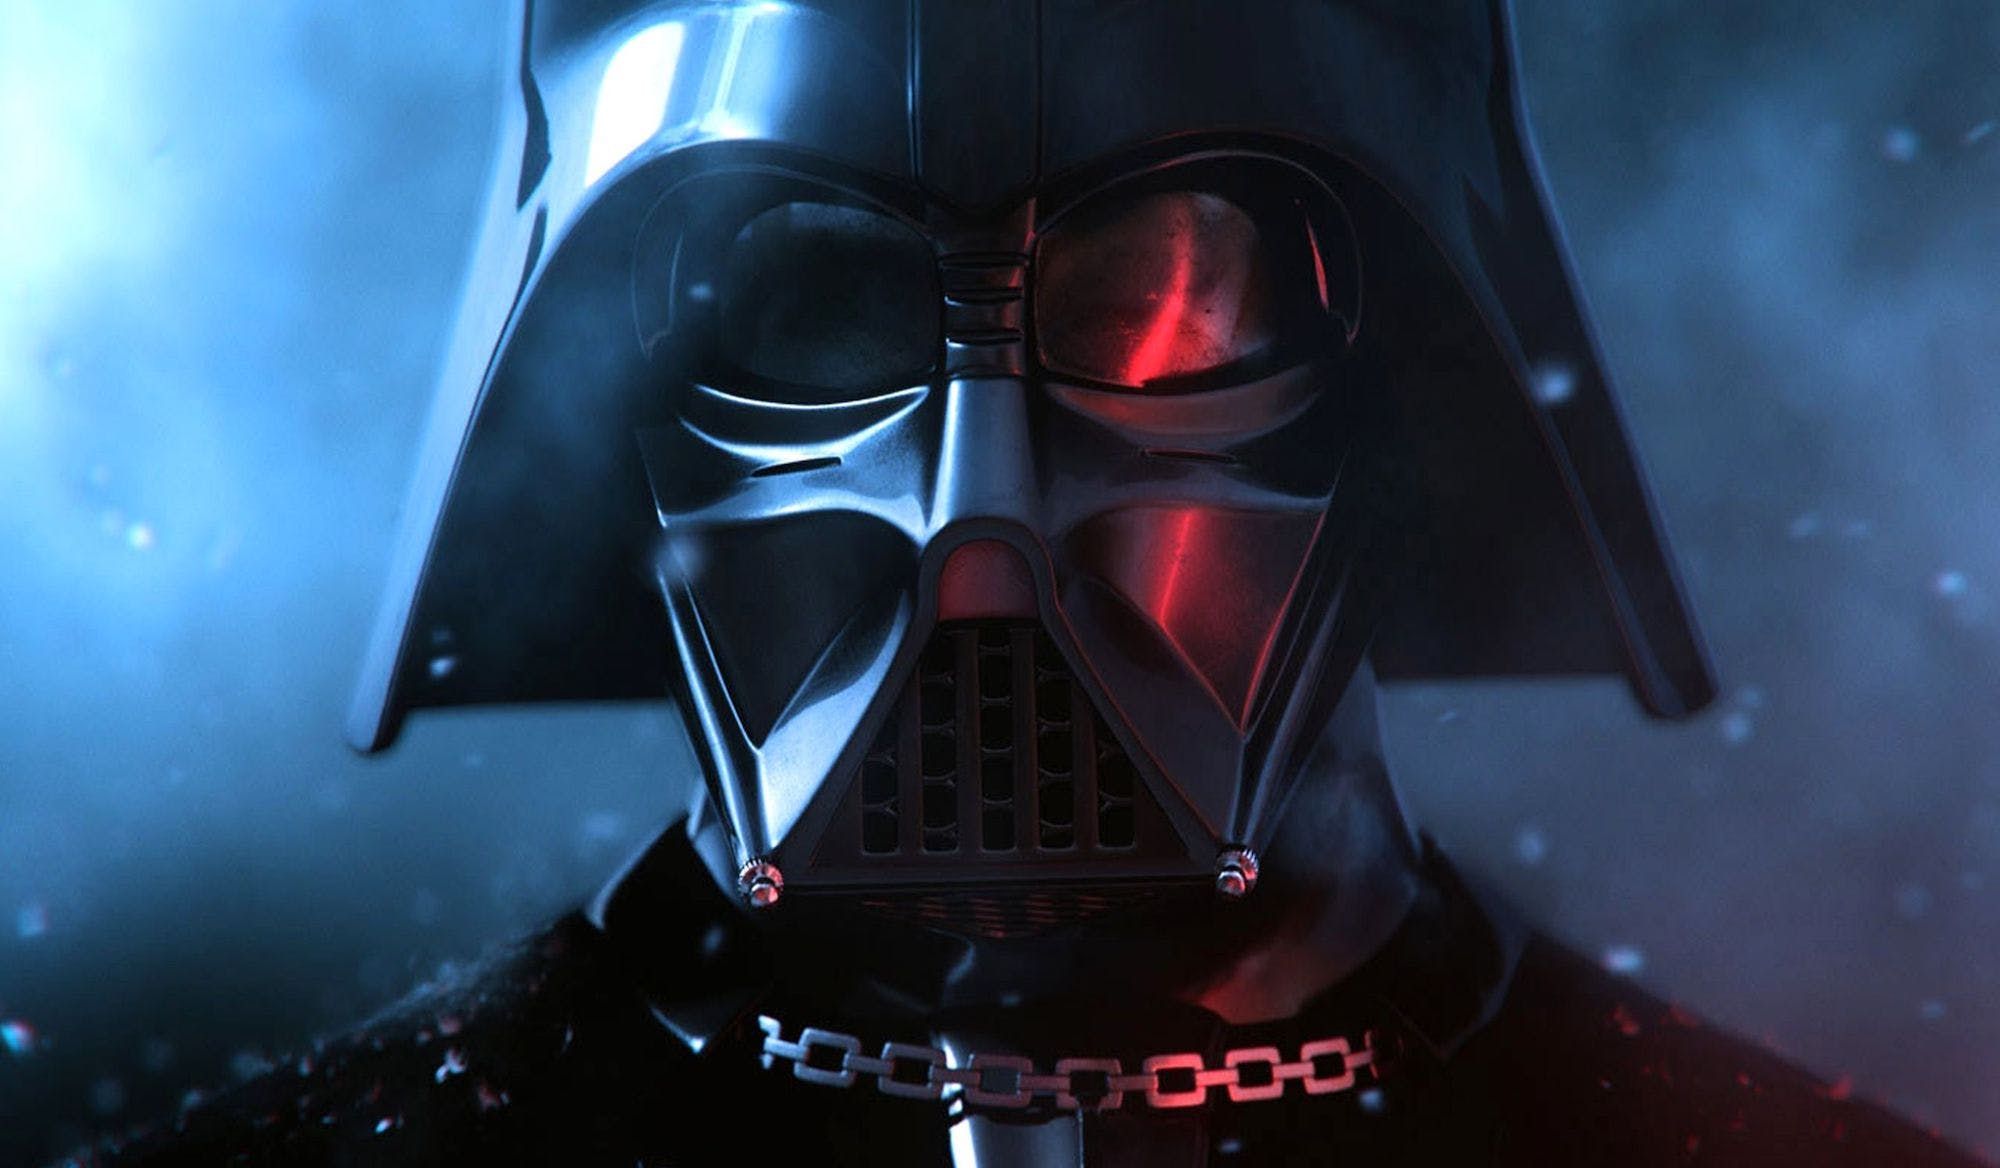 Lets Hope The Force Is Strong With This Darth VaderThemed Story Series Coming To Oculus VR